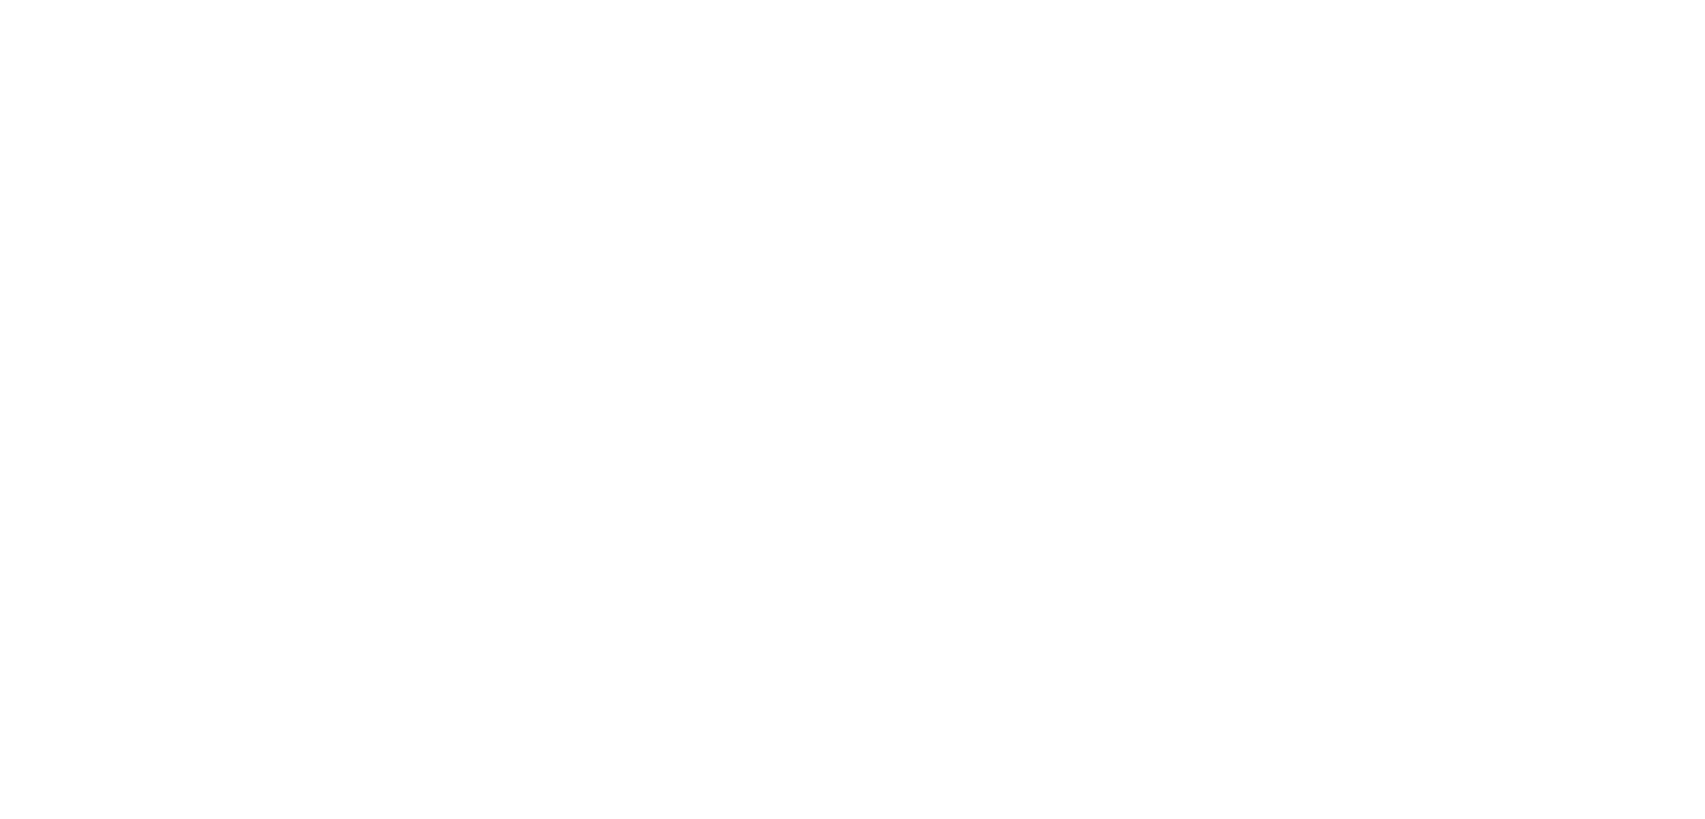 Mexican Geniuses London: A Frida & Diego Immersive Experience